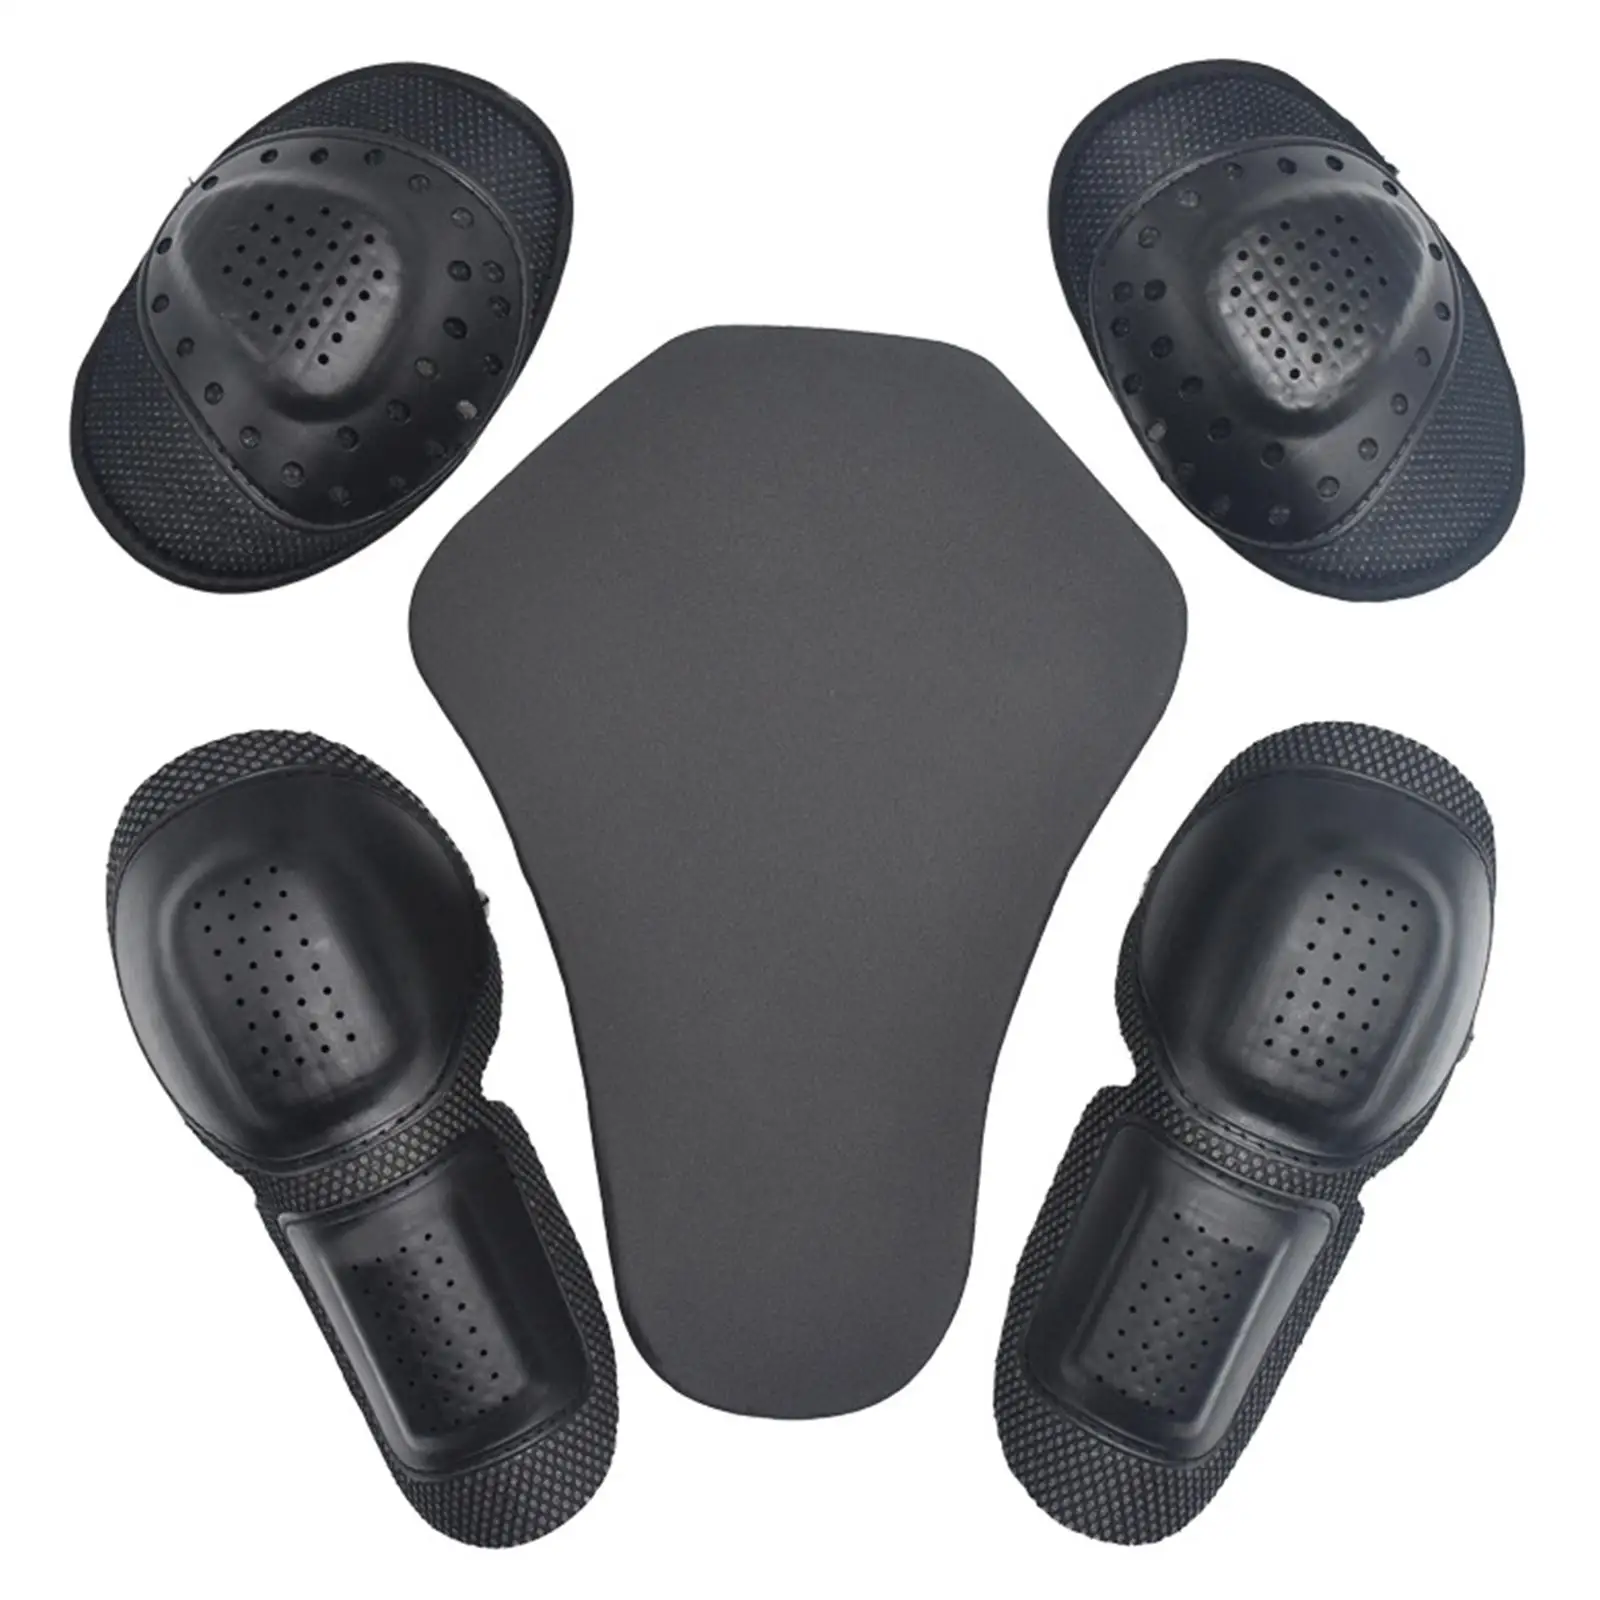 5Pieces Riding Shoulder Protector Shoulder Guard Motorcycle Armor Pad Racing Guard Fit for Motorcycle Jackets Pants Racing